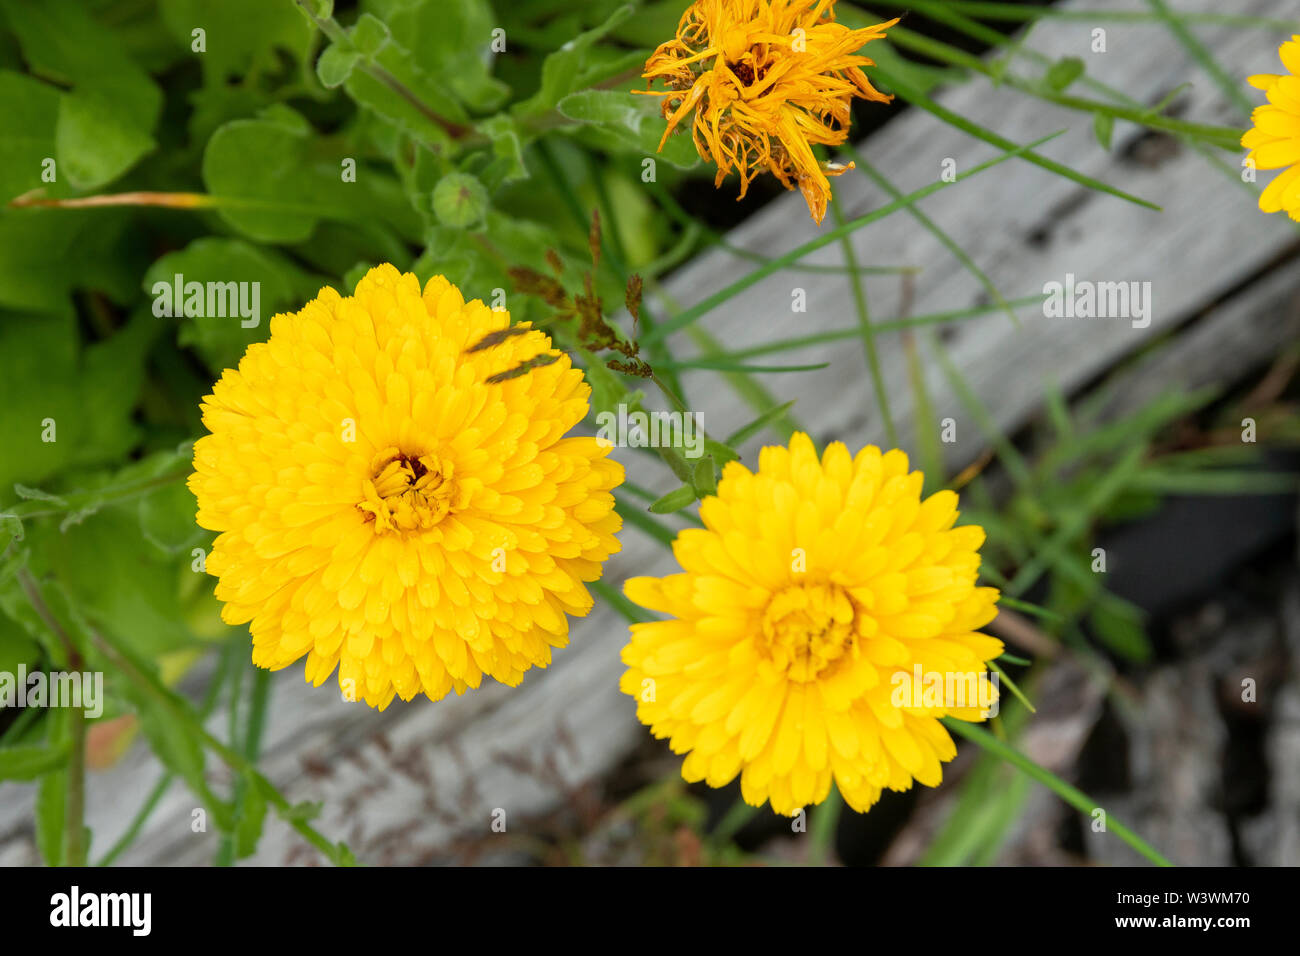 Bright yellow flowers bloom in a backyard vegetable garden. Stock Photo